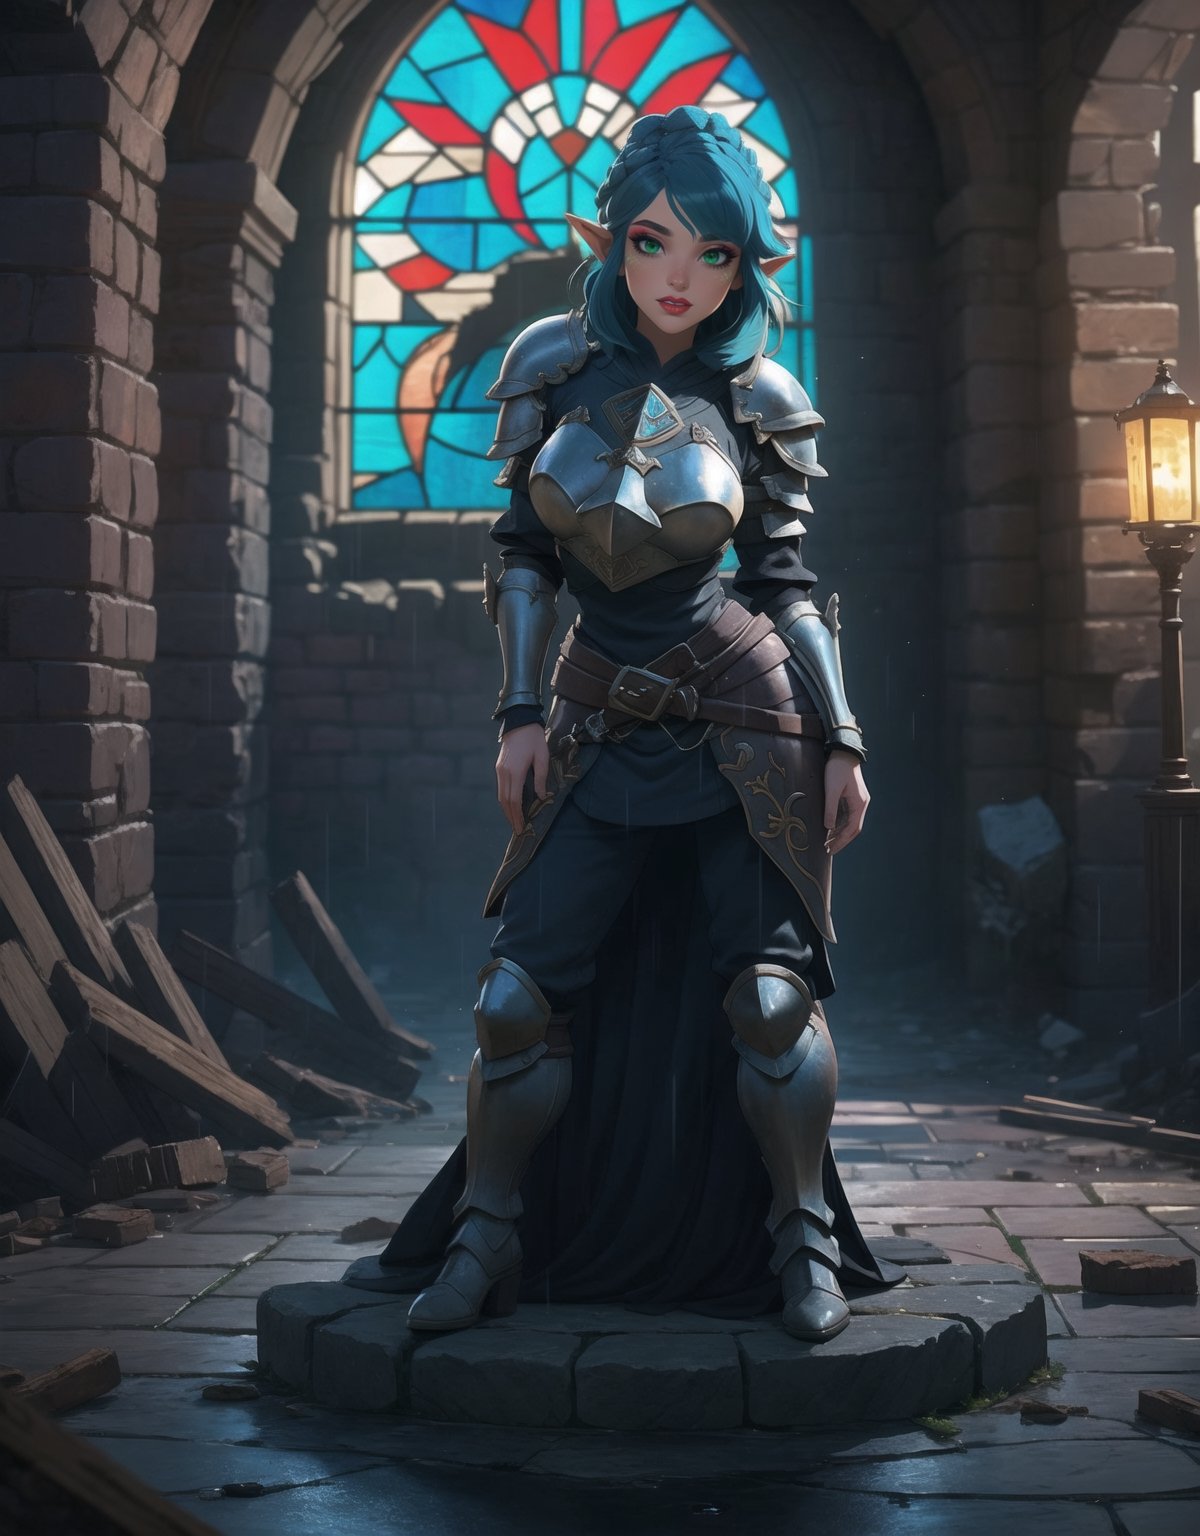 Resolution in UHD, inspired by the style of Zelda: Breath of the Wild. | Among the ruins of an ancient castle, a woman of extraordinary beauty wears a completely black medieval armor. Her blue eyes radiate happiness, and a big smile lights up her face as she looks directly at the viewer. The short and spiky blue hair, with a generous fringe covering the right eye, adds a unique touch. Adopting a sensual pose, she leans on a large structure, gracefully leaning backward. The camera, positioned very close, focuses on the entire body of the main character. | The nighttime environment is intensified by heavy rain, revealing detailed ruins, a large sword embedded in a stone, rusty armor, and rocky structures. A large stained glass window adorns the scene with vibrant colors, while destroyed furniture and ancient texts complete the atmosphere. | Meticulously adjusted lighting enhances the beauty of the woman in the black armor, while rain effects add movement to the scene. The Breath of the Wild style is incorporated in the fusion of medieval and fantastical elements. | An exceptional warrior in black medieval armor, radiating happiness in the ruins of an ancient castle during a rainy night. | She is adopting a ((sensual pose as interacts, boldly leaning on a large structure in the scene, leaning back in a dynamic way, adding a unique touch to the scene.):1.3), (((full body))), perfect hand, fingers, hand, perfect, better_hands, More Detail,